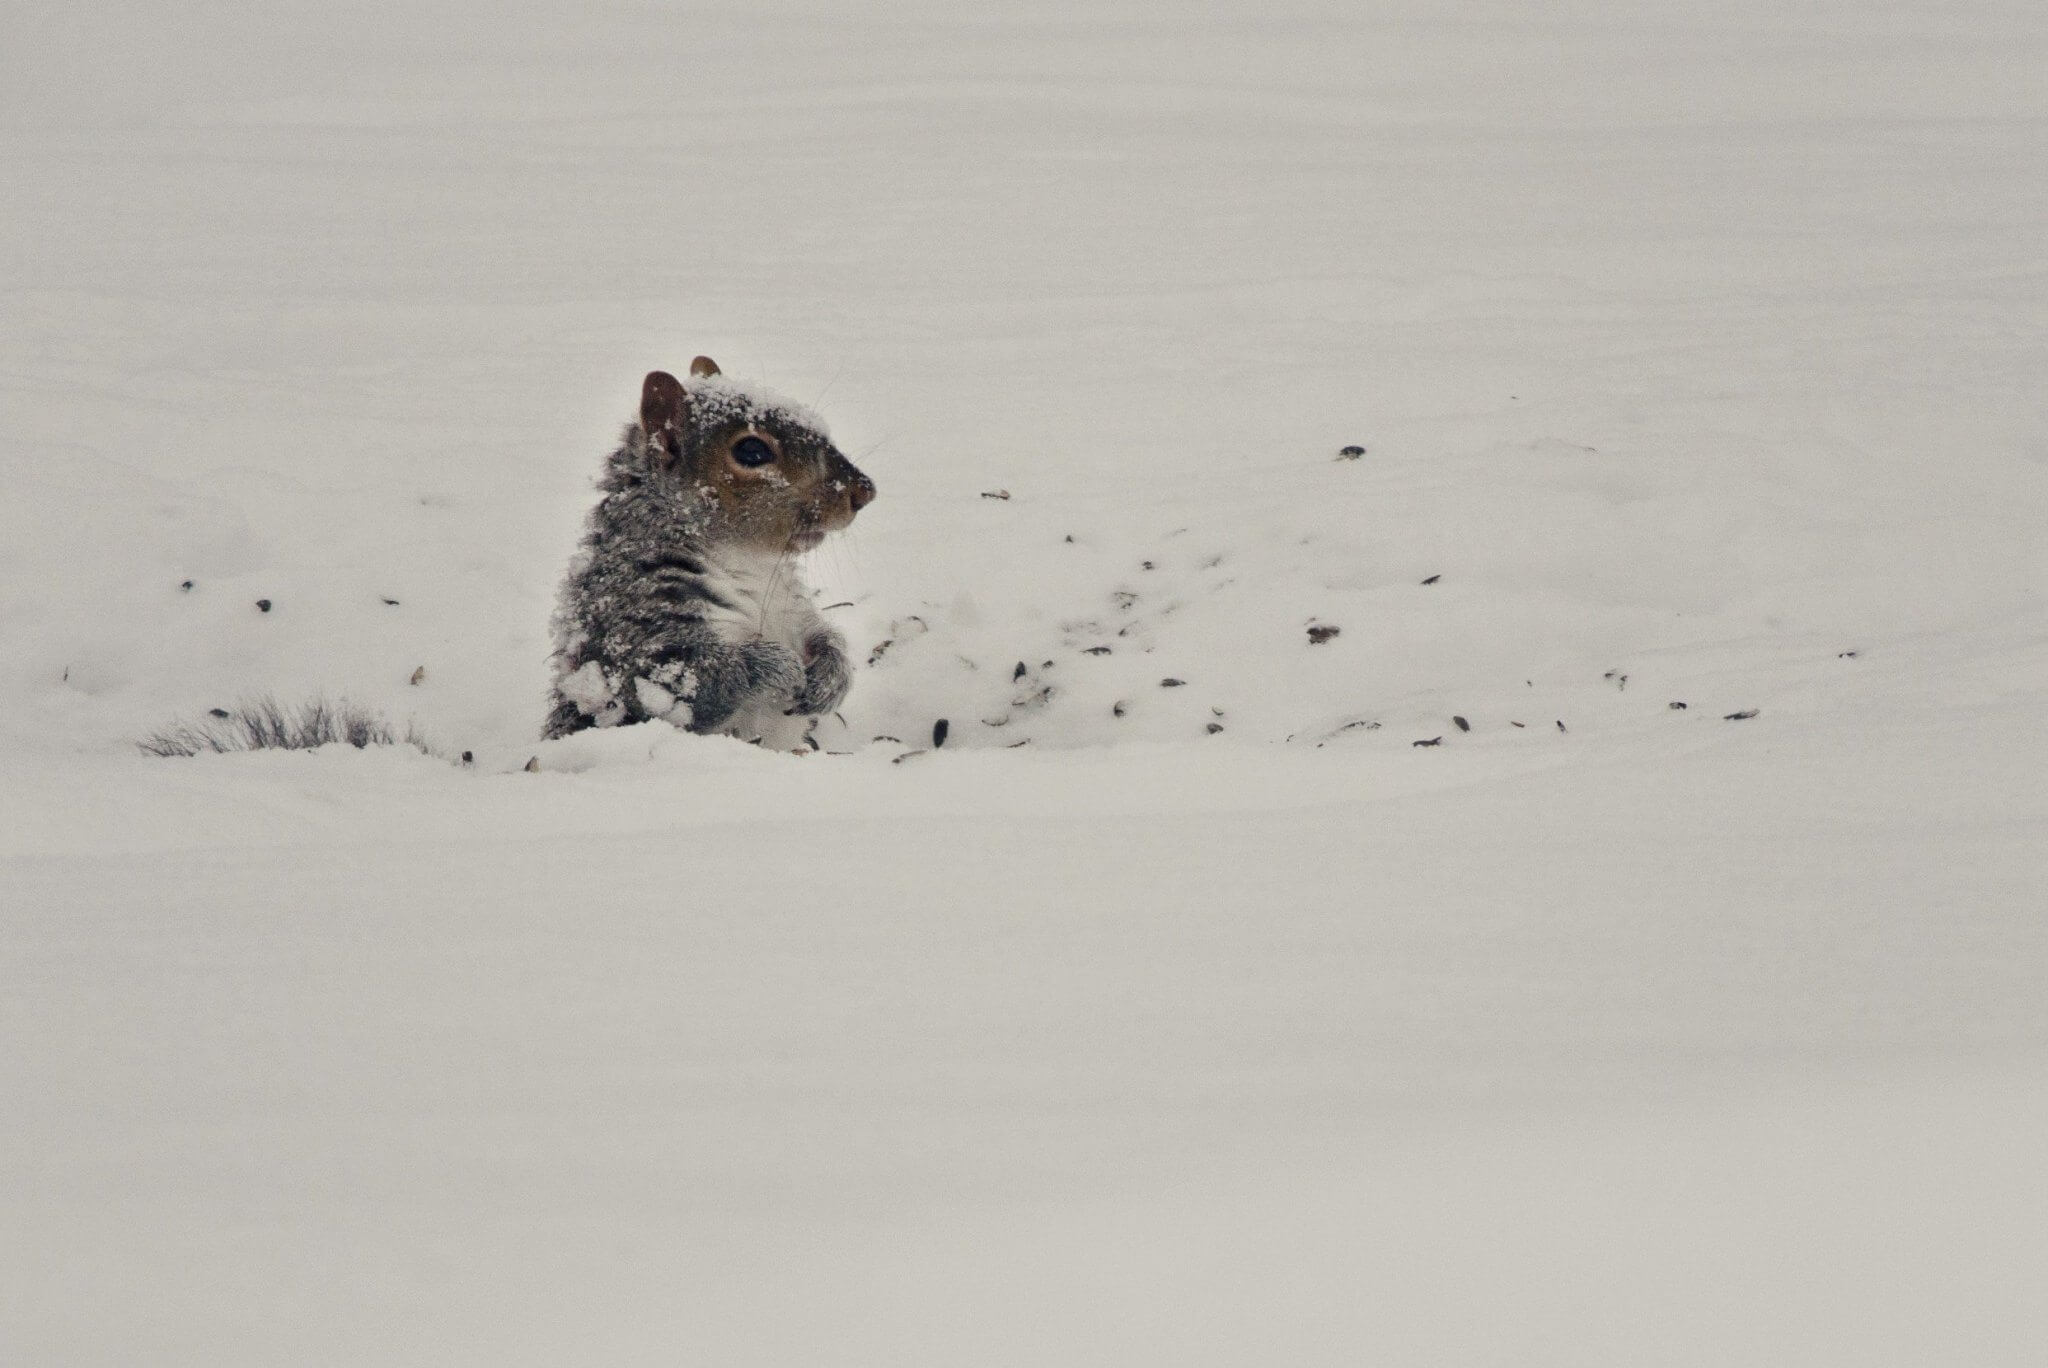 photo of squirrel in snow winter weight gain